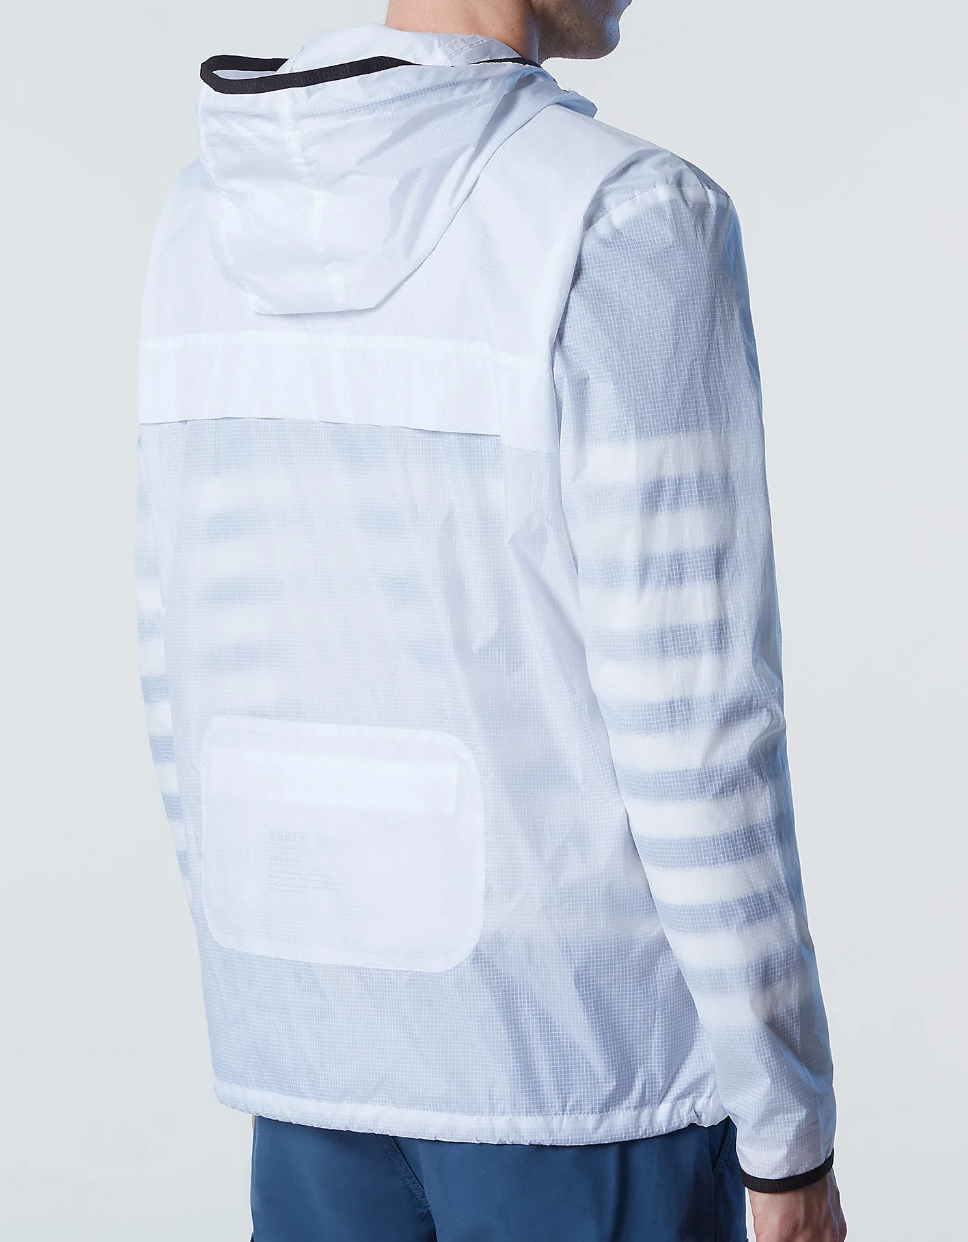 North Sails "Spinnaker" Packable Jacket White